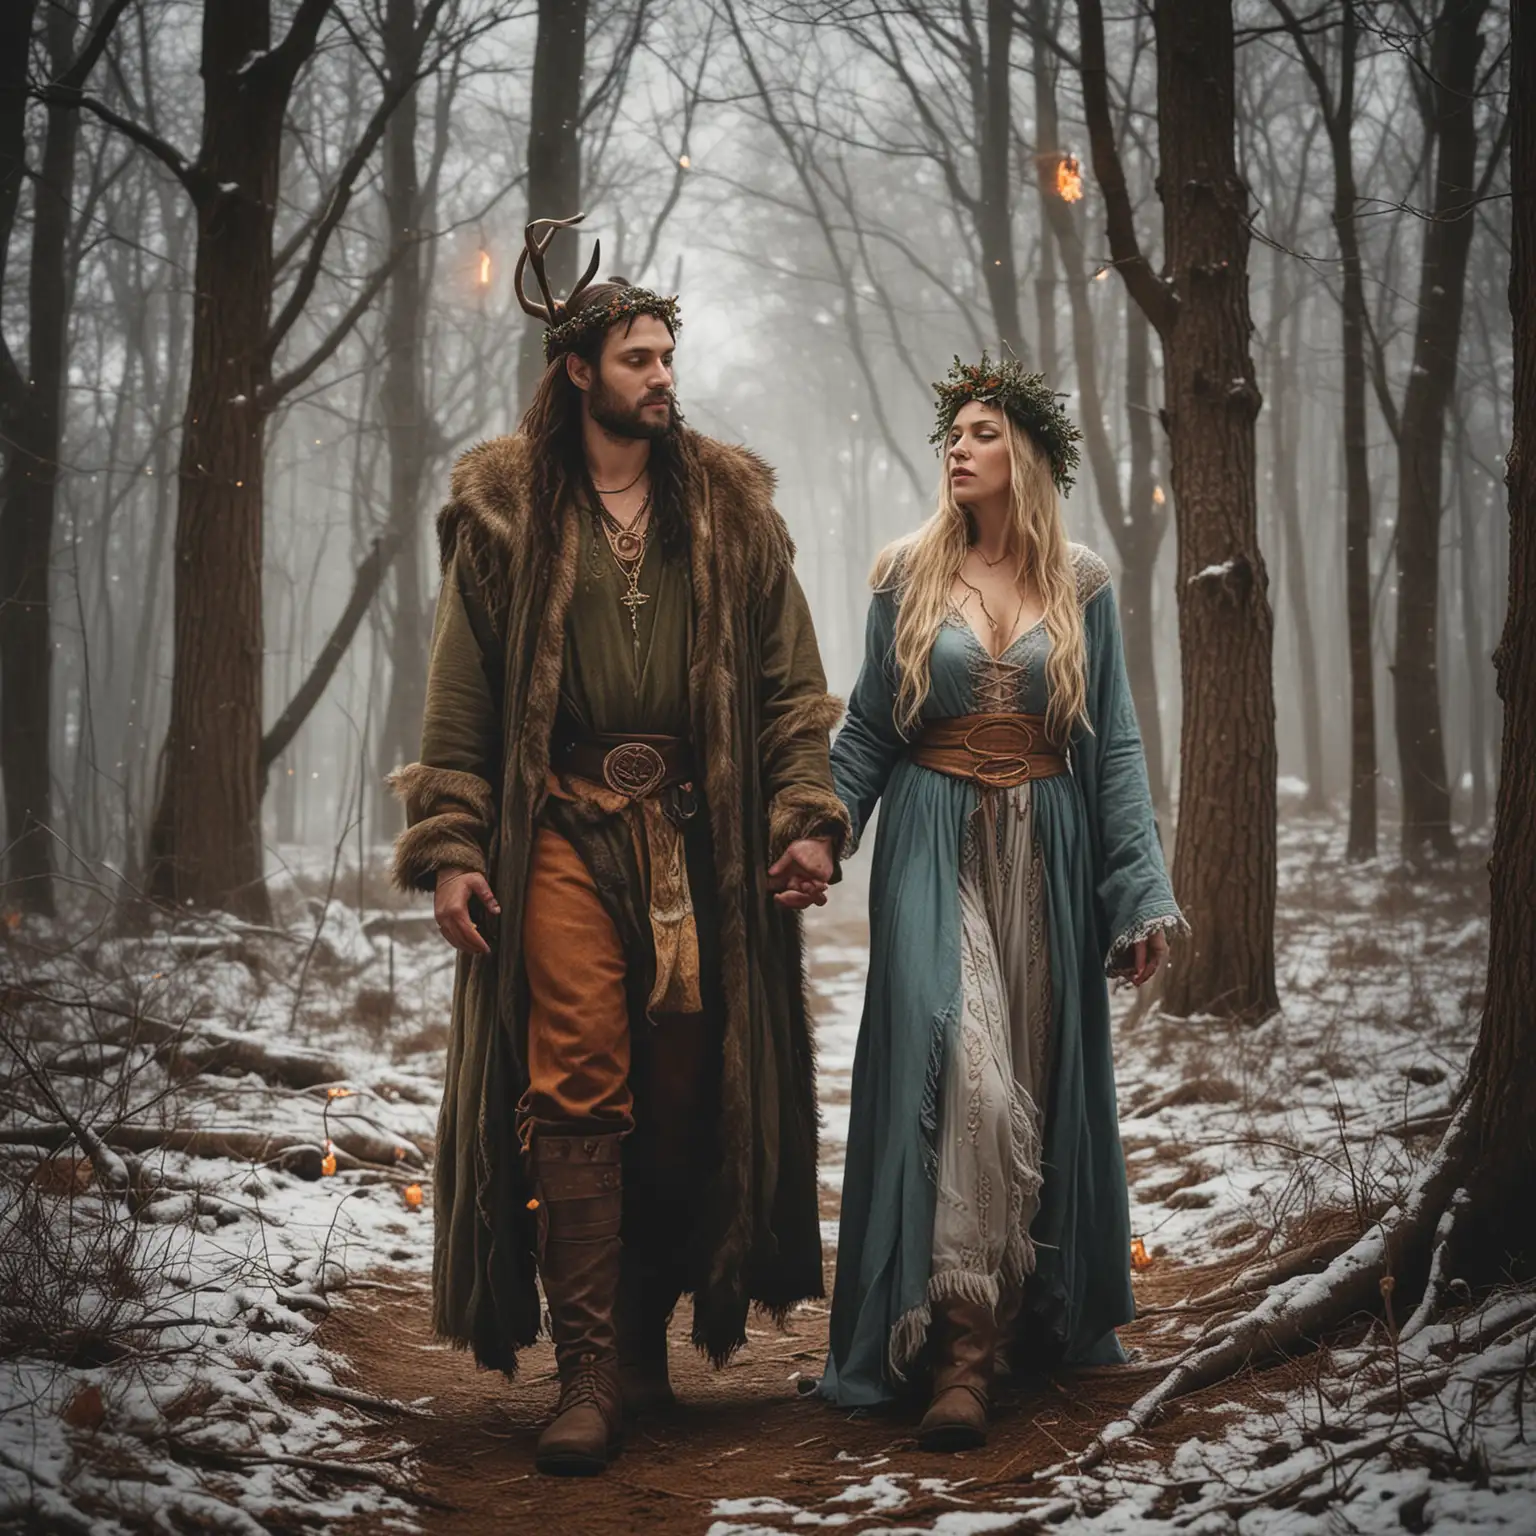 Pagan Winter Solstice Celebration in Wooded Area with Man and Woman